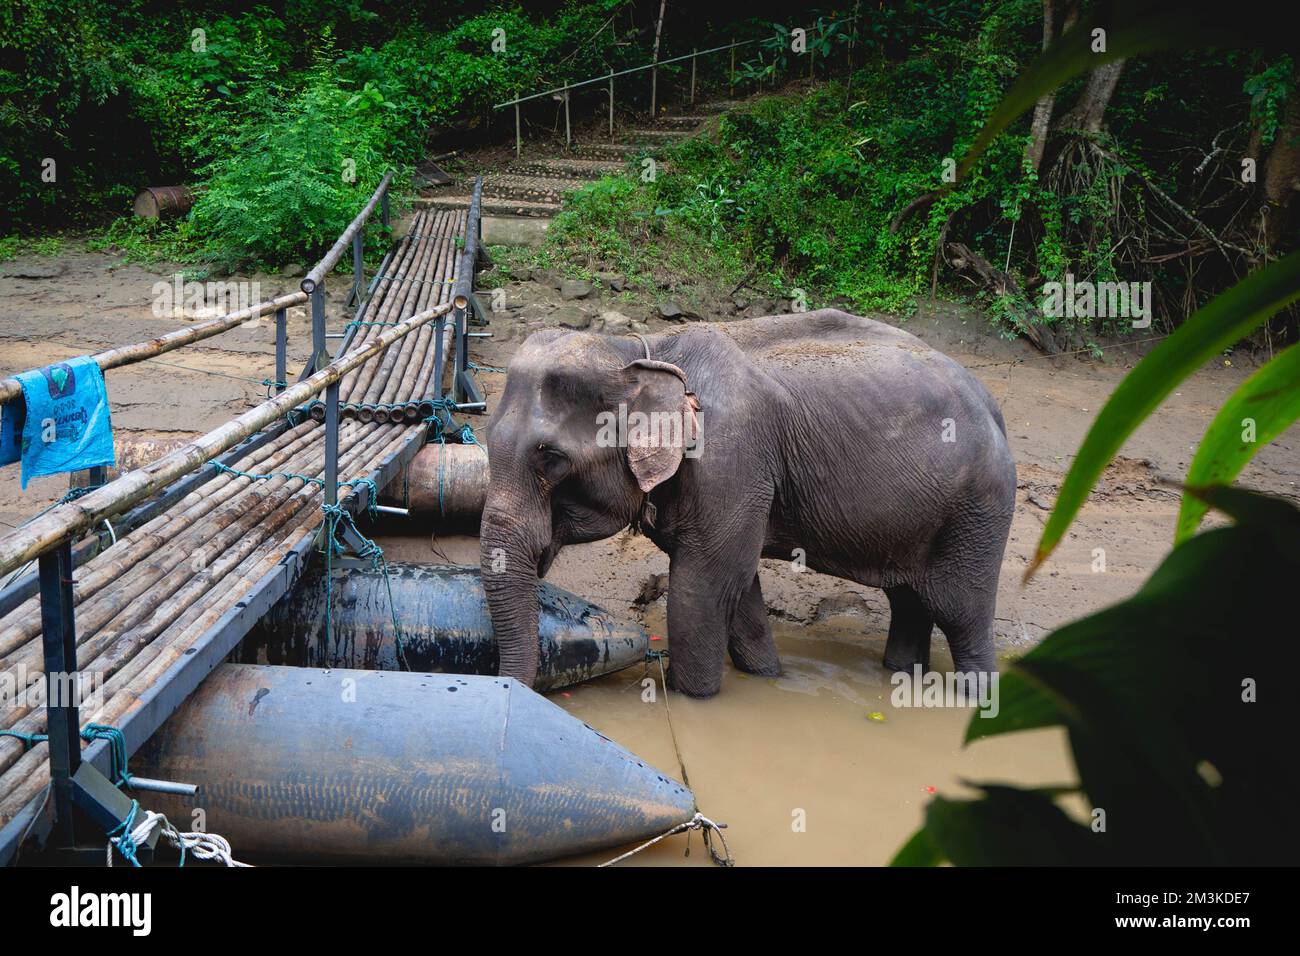 An elephant eating water near the bridge used to cross to the raft. Stock Photo